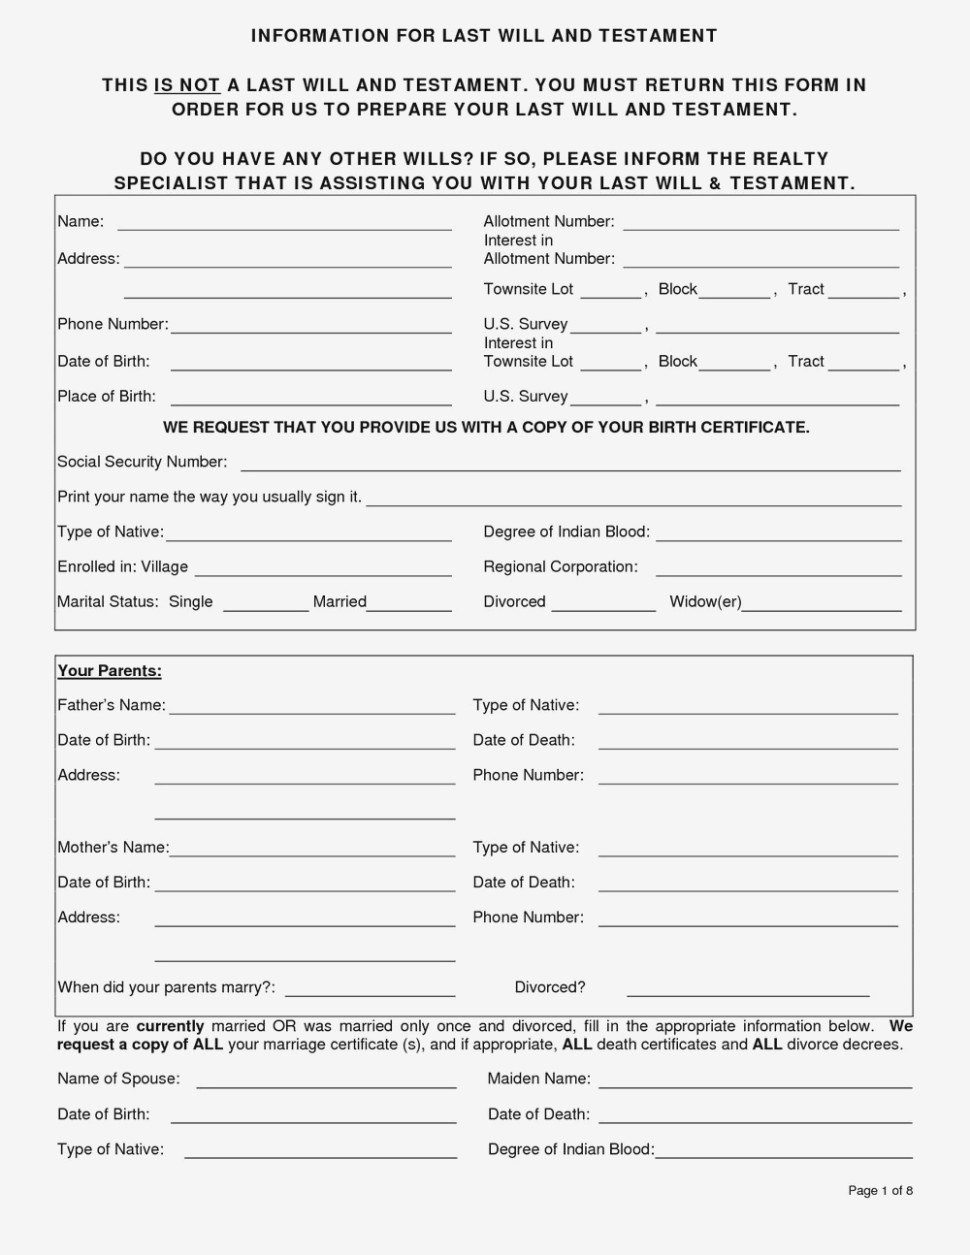 Free Printable Last Will And Testament Forms Pdf | Resume Examples - Free Printable Last Will And Testament Forms